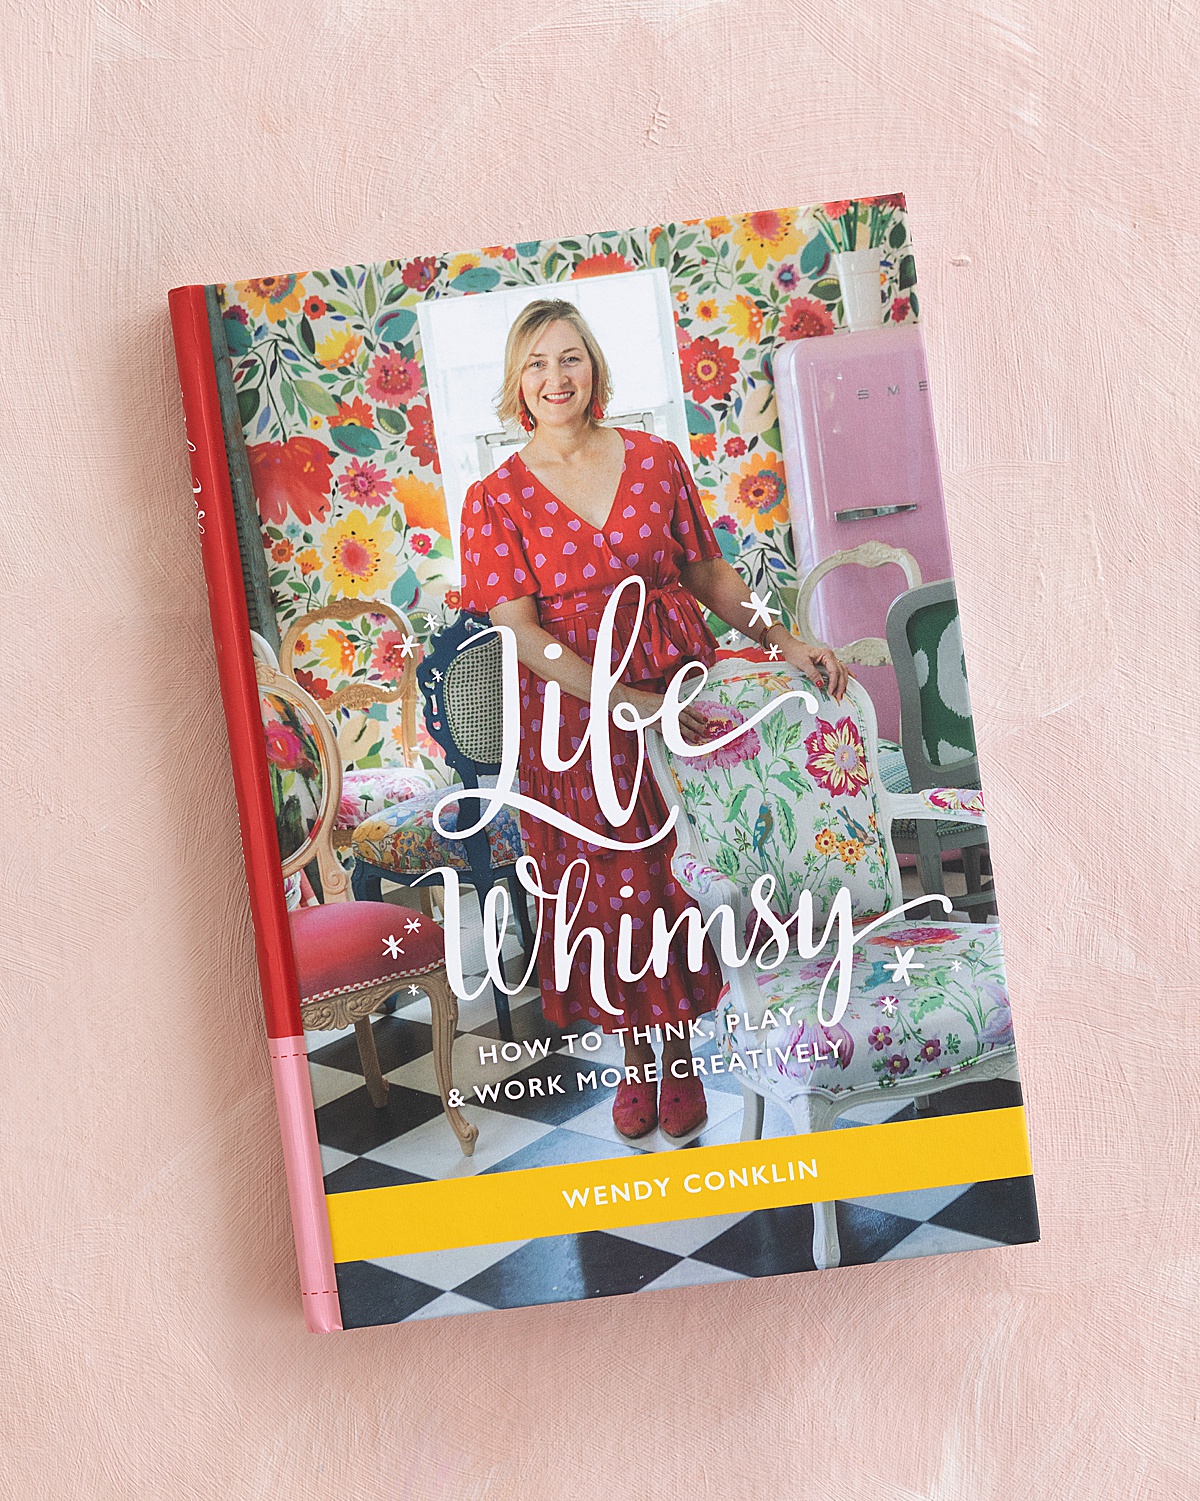 Published: The new Life Whimsy book!